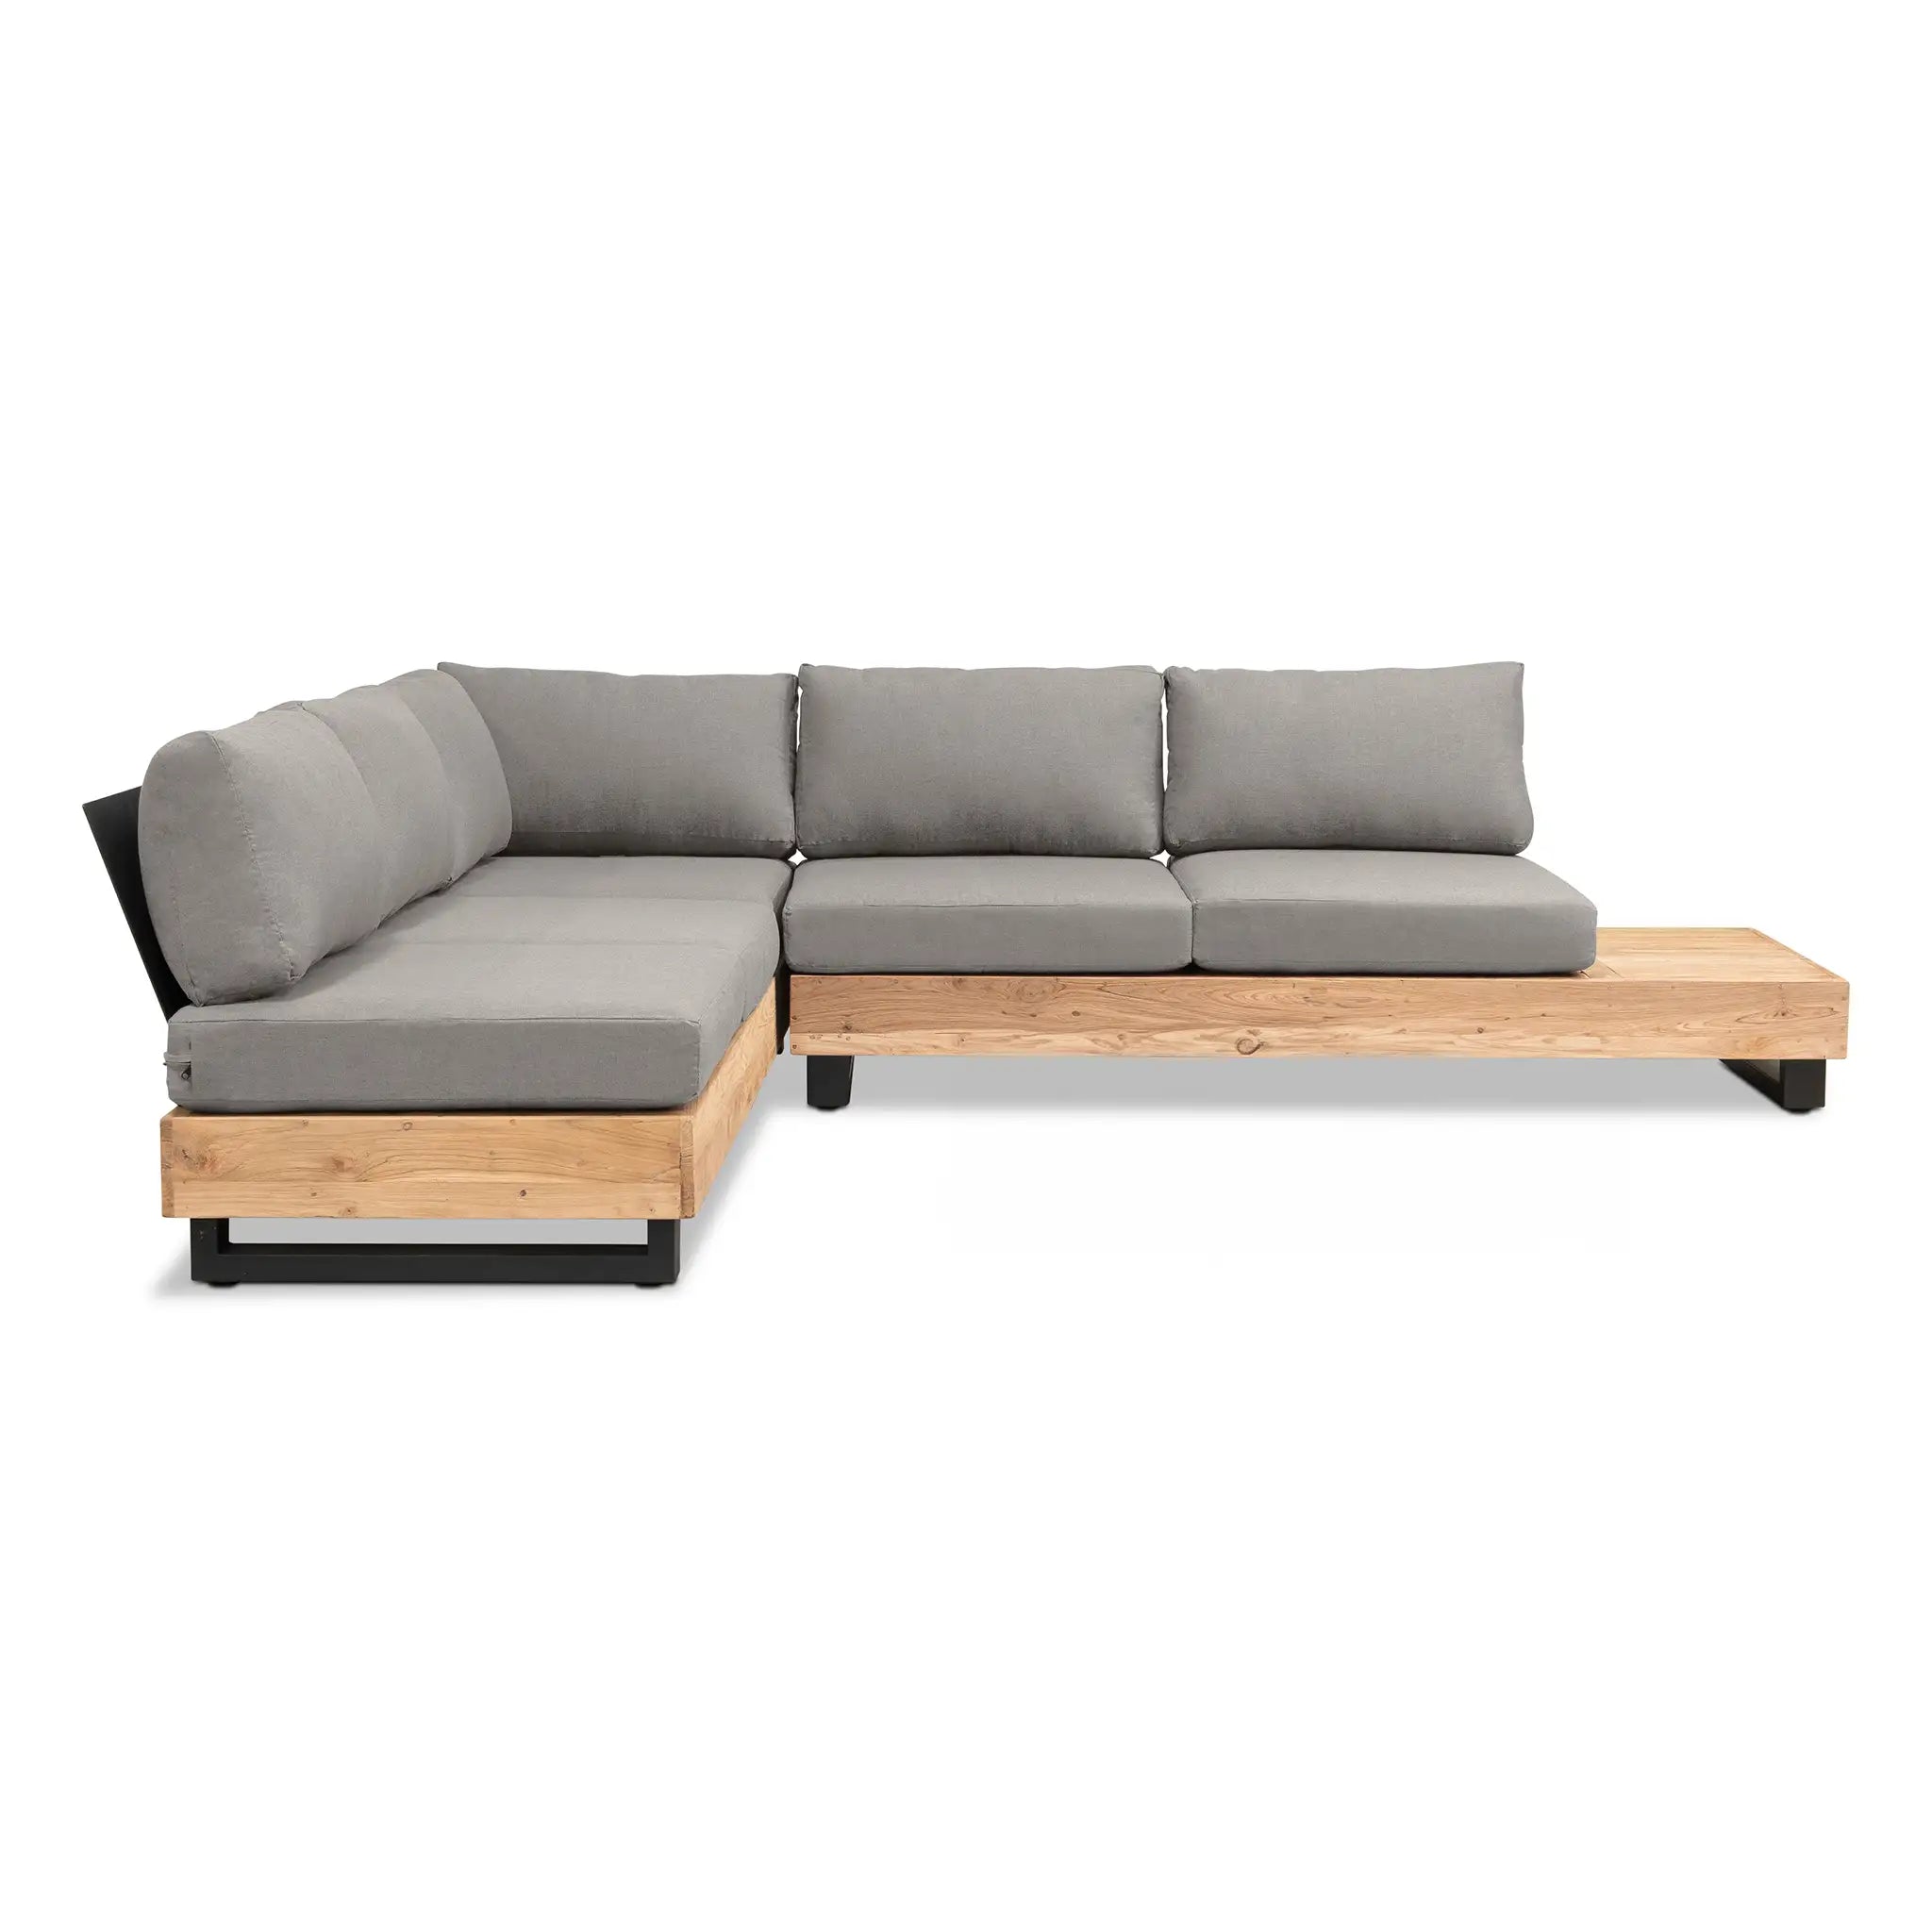 Meld 5 to 6 Seat Reclaimed Teak Sectional Set by Harmonia Living